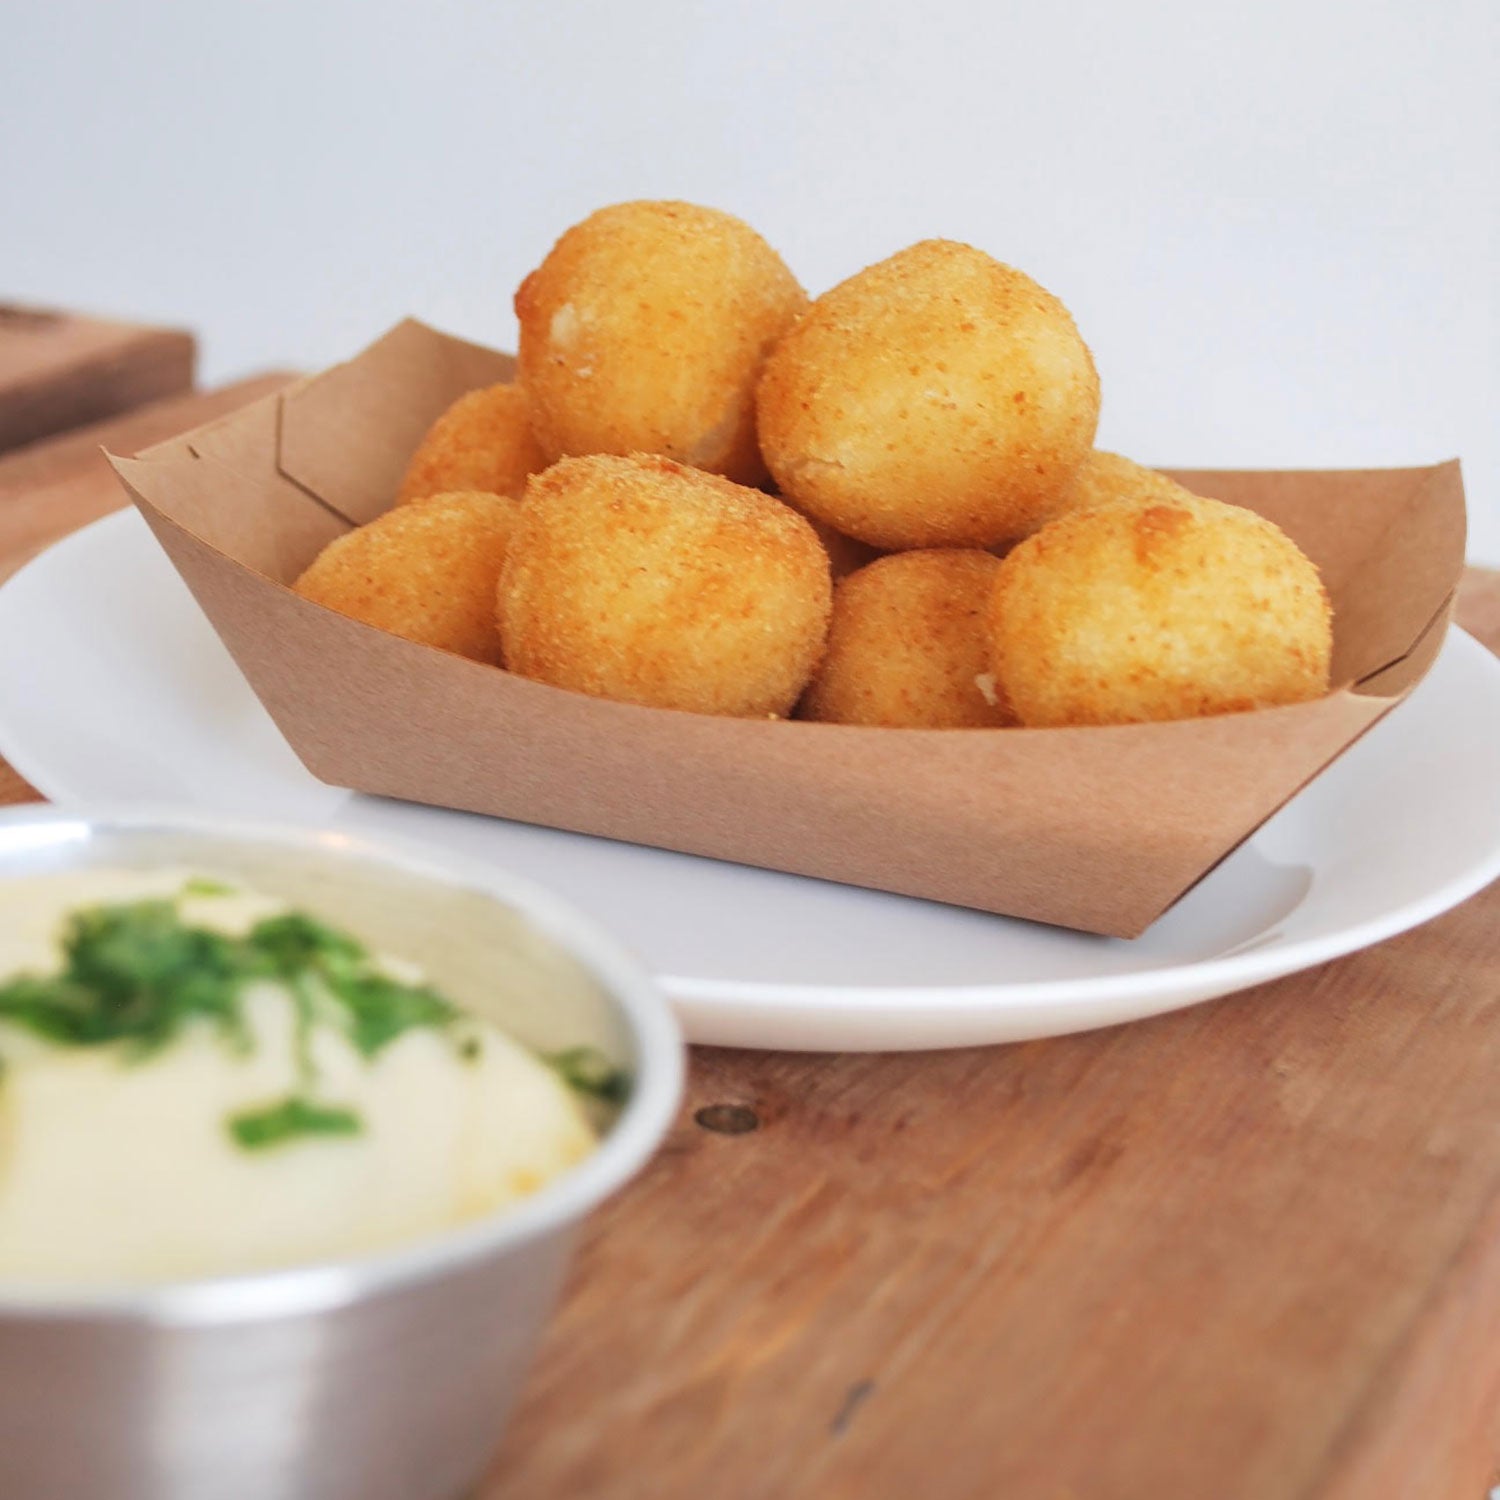 Croquettes au Fromage - Cheese Ball